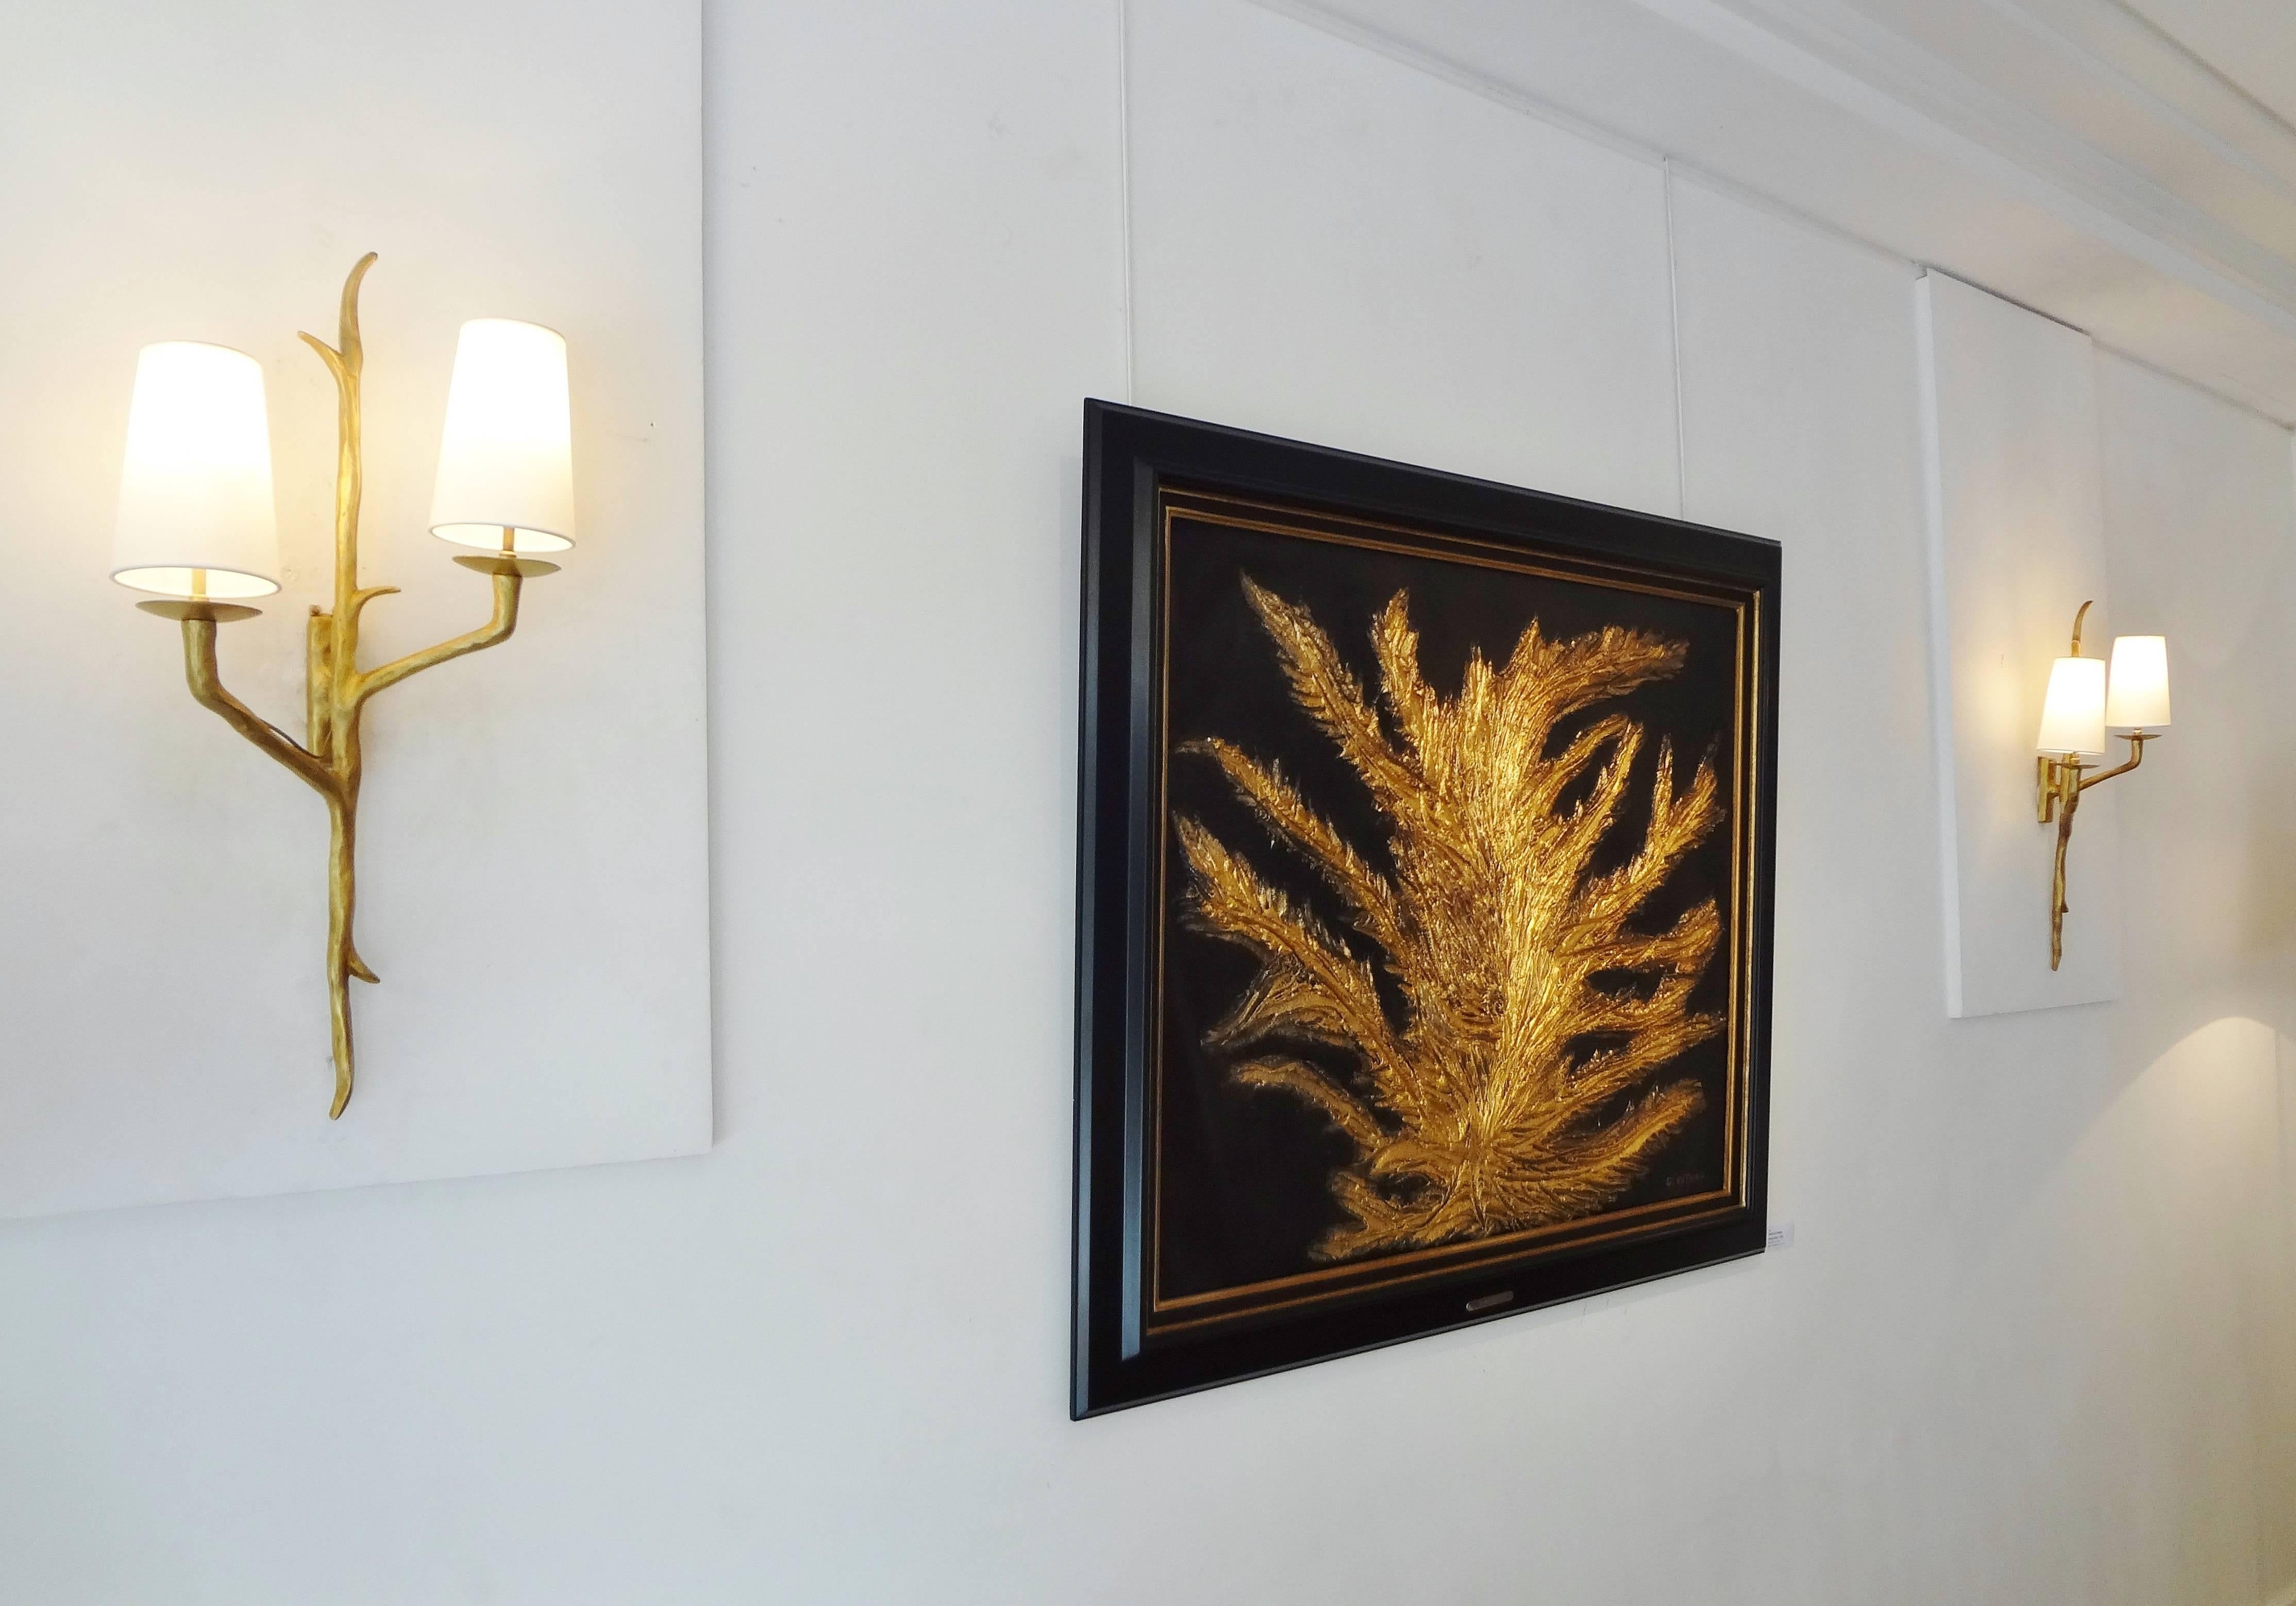 Pair of gilt patinated wall sconces by Maison Arlus, 1950s
as tree branches, with two lights each. 
White fabric conical shades.


